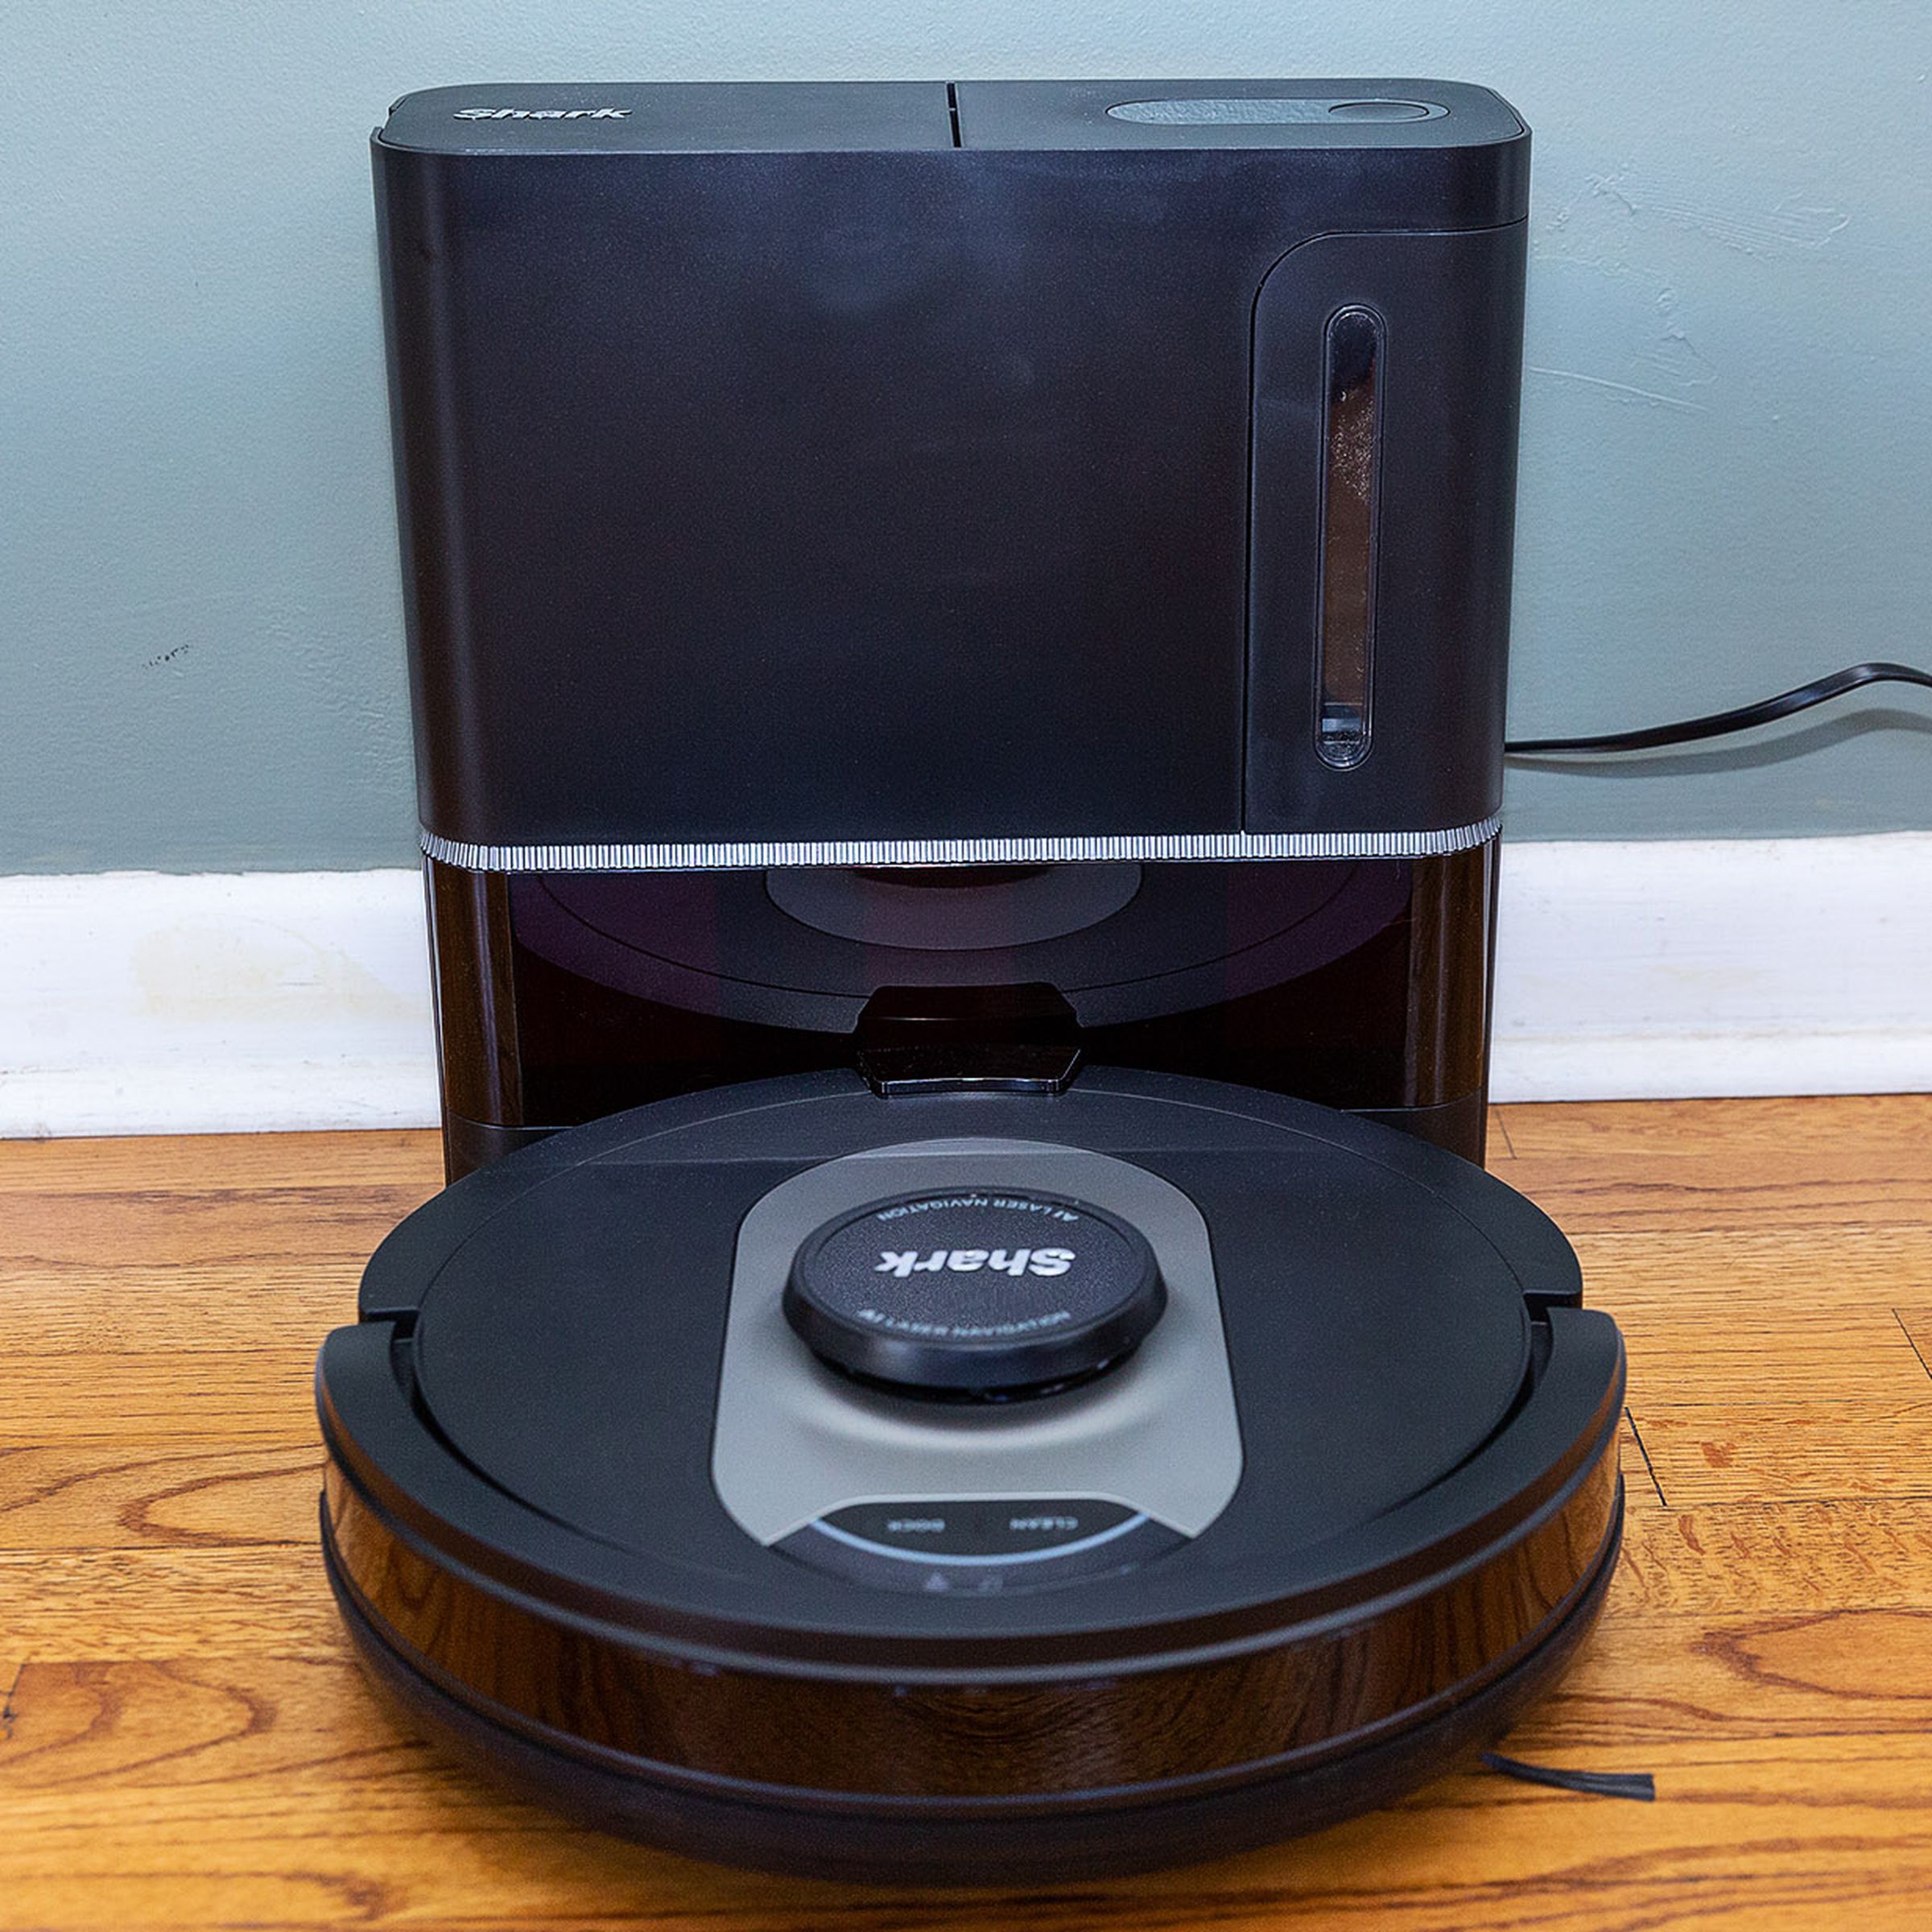 A head-on angle of the Shark AV2501AE AI Robot Vacuum docked in its self-cleaning station against a wall, plugged into a nearby outlet.